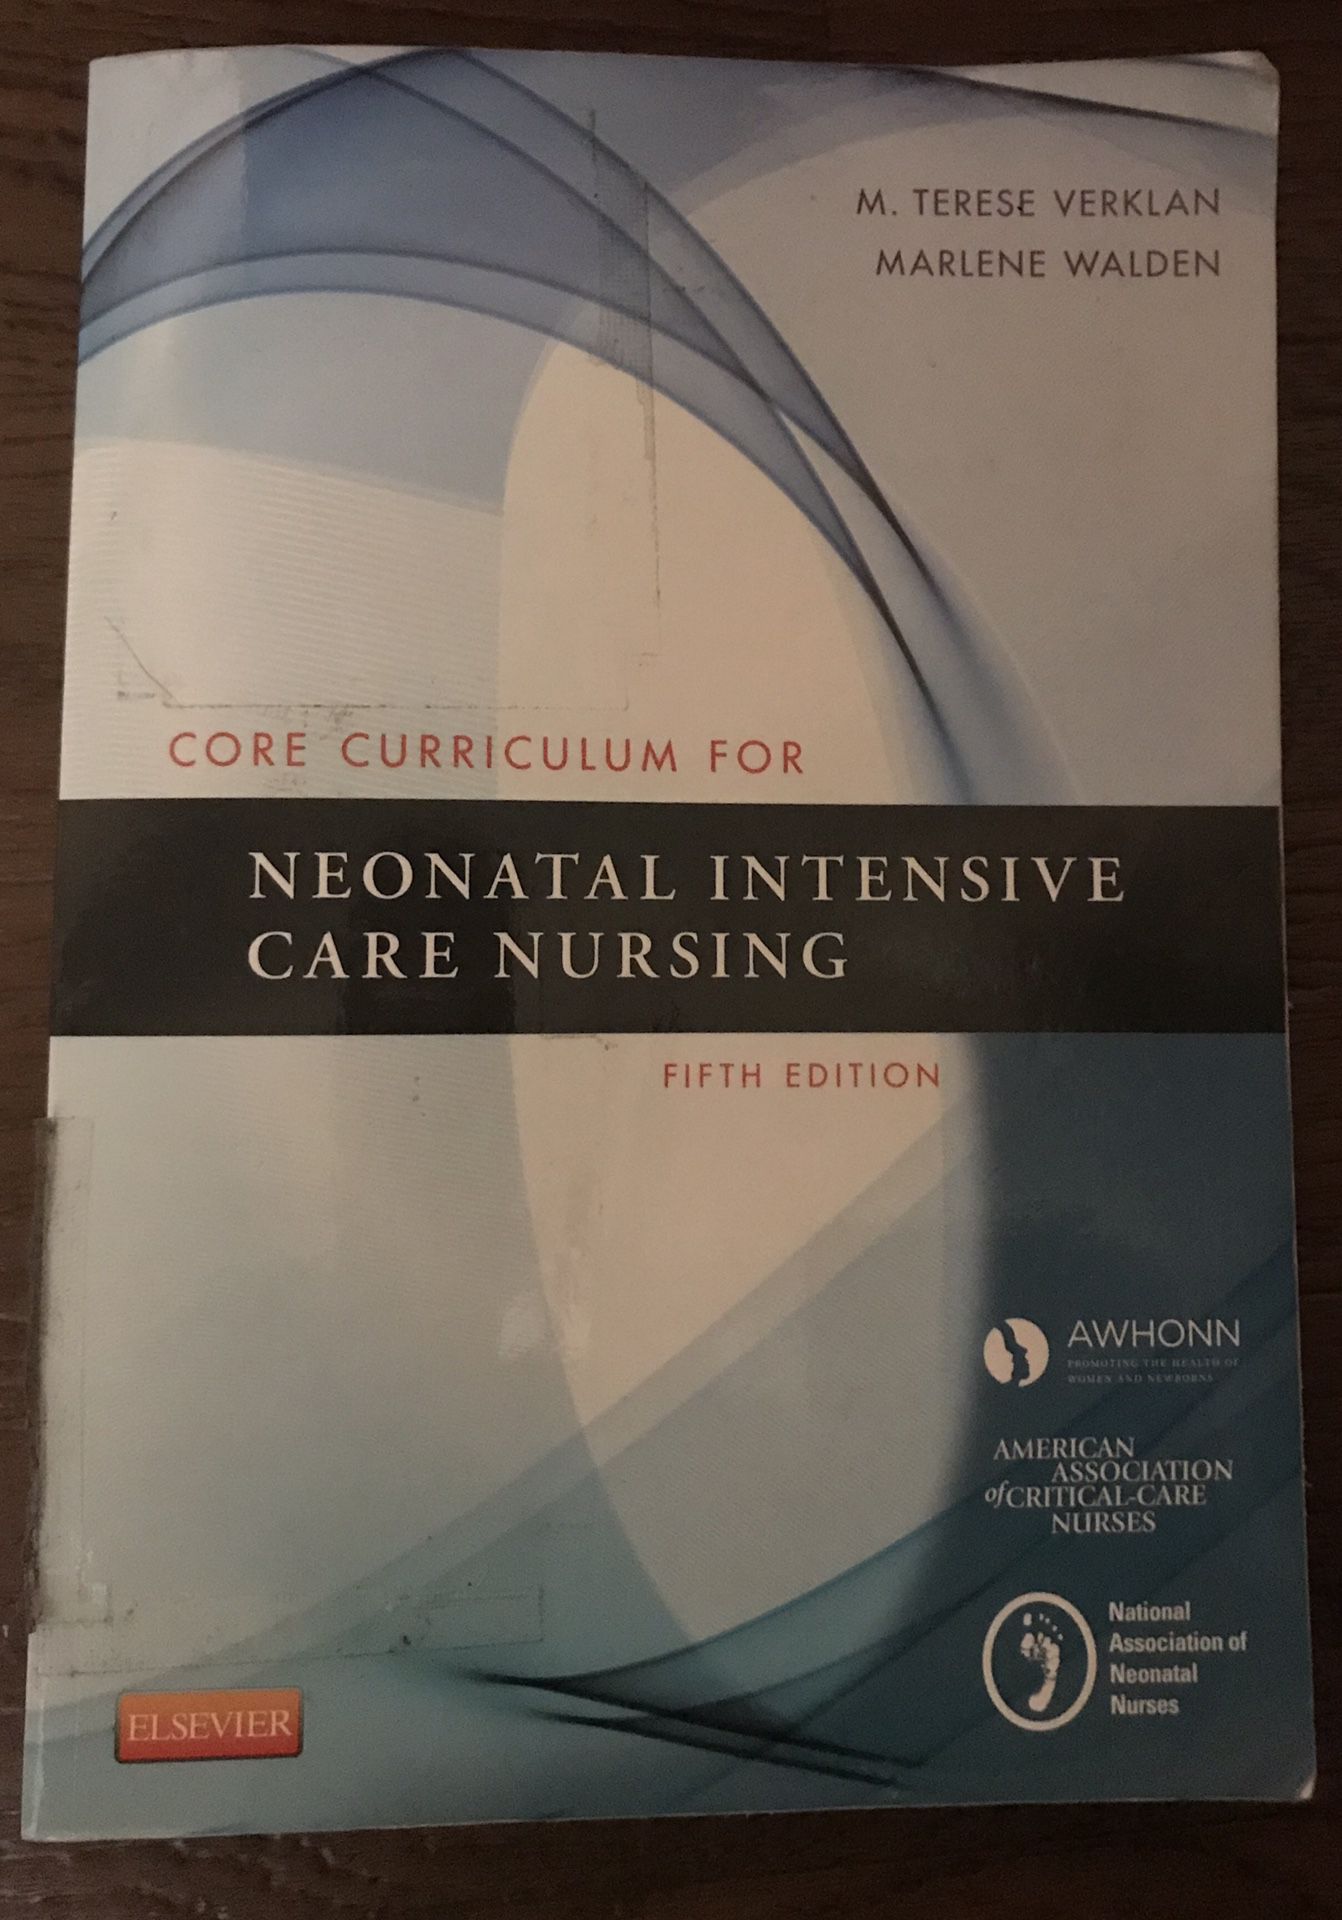 BOOK - CORE CURRICULUM for NEONATAL INTENSIVE CARE. Fifth Edition. Like New.